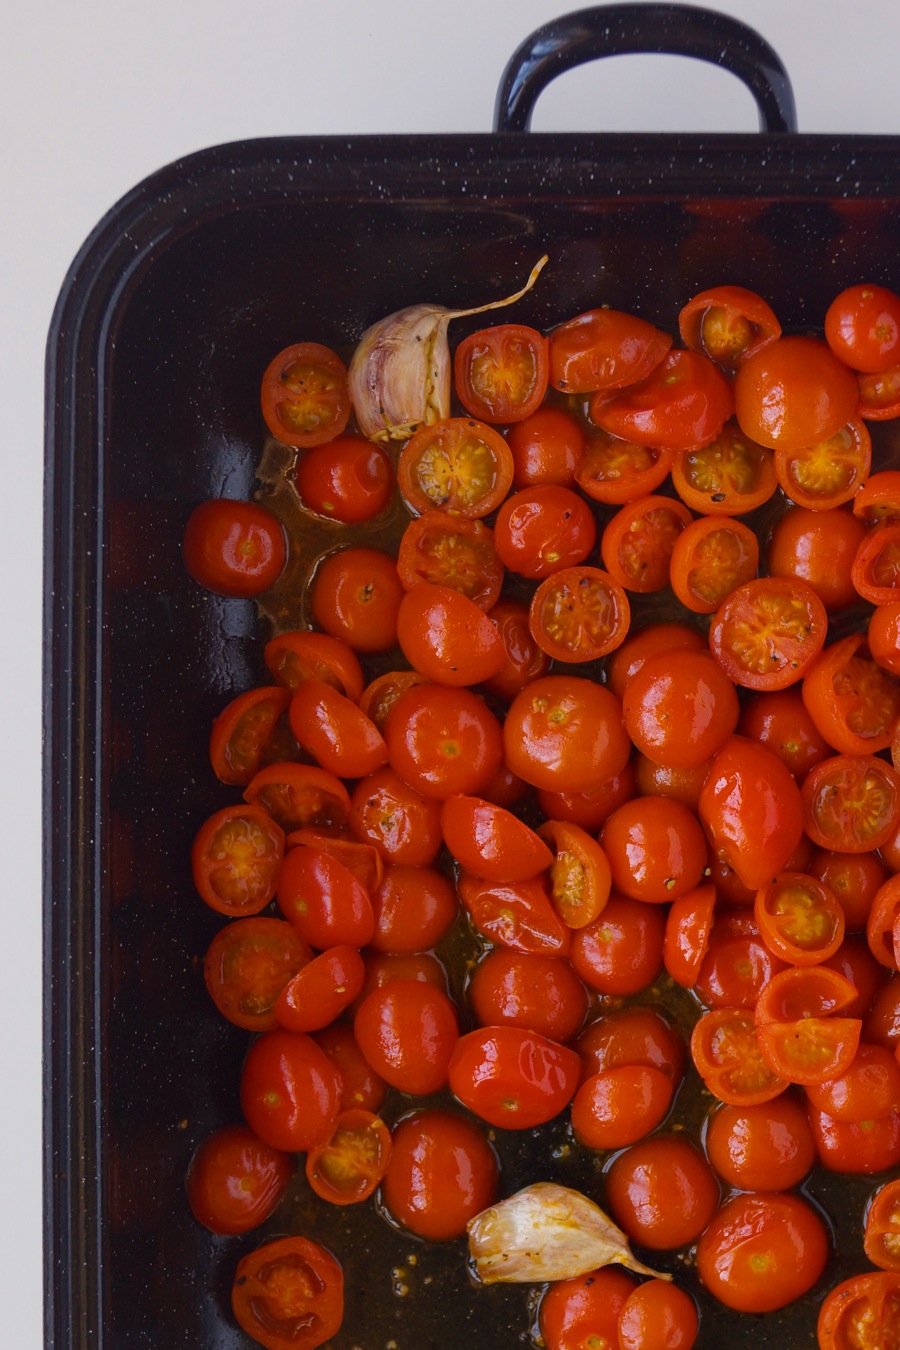 Burst, roasted tomatoes in a pan